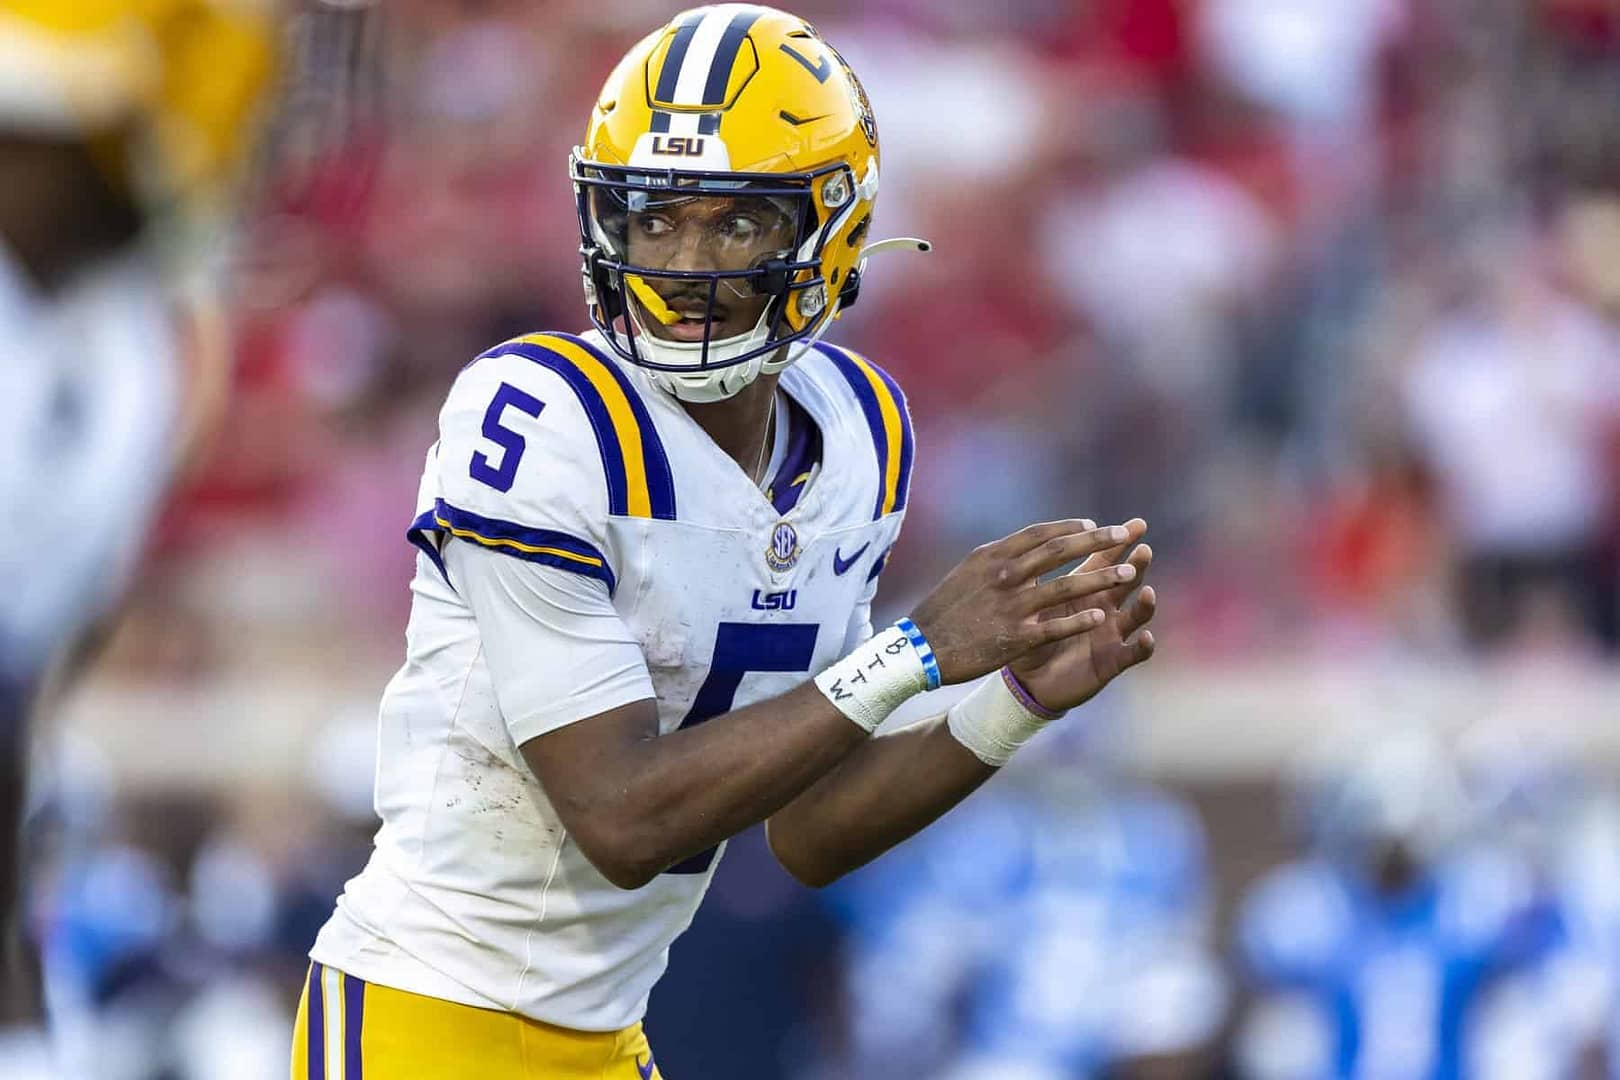 Need a college football lock for Week 13? Tail this Texas A&M-LSU pick and prediction! The Aggies head into Baton Rouge as big underdogs...